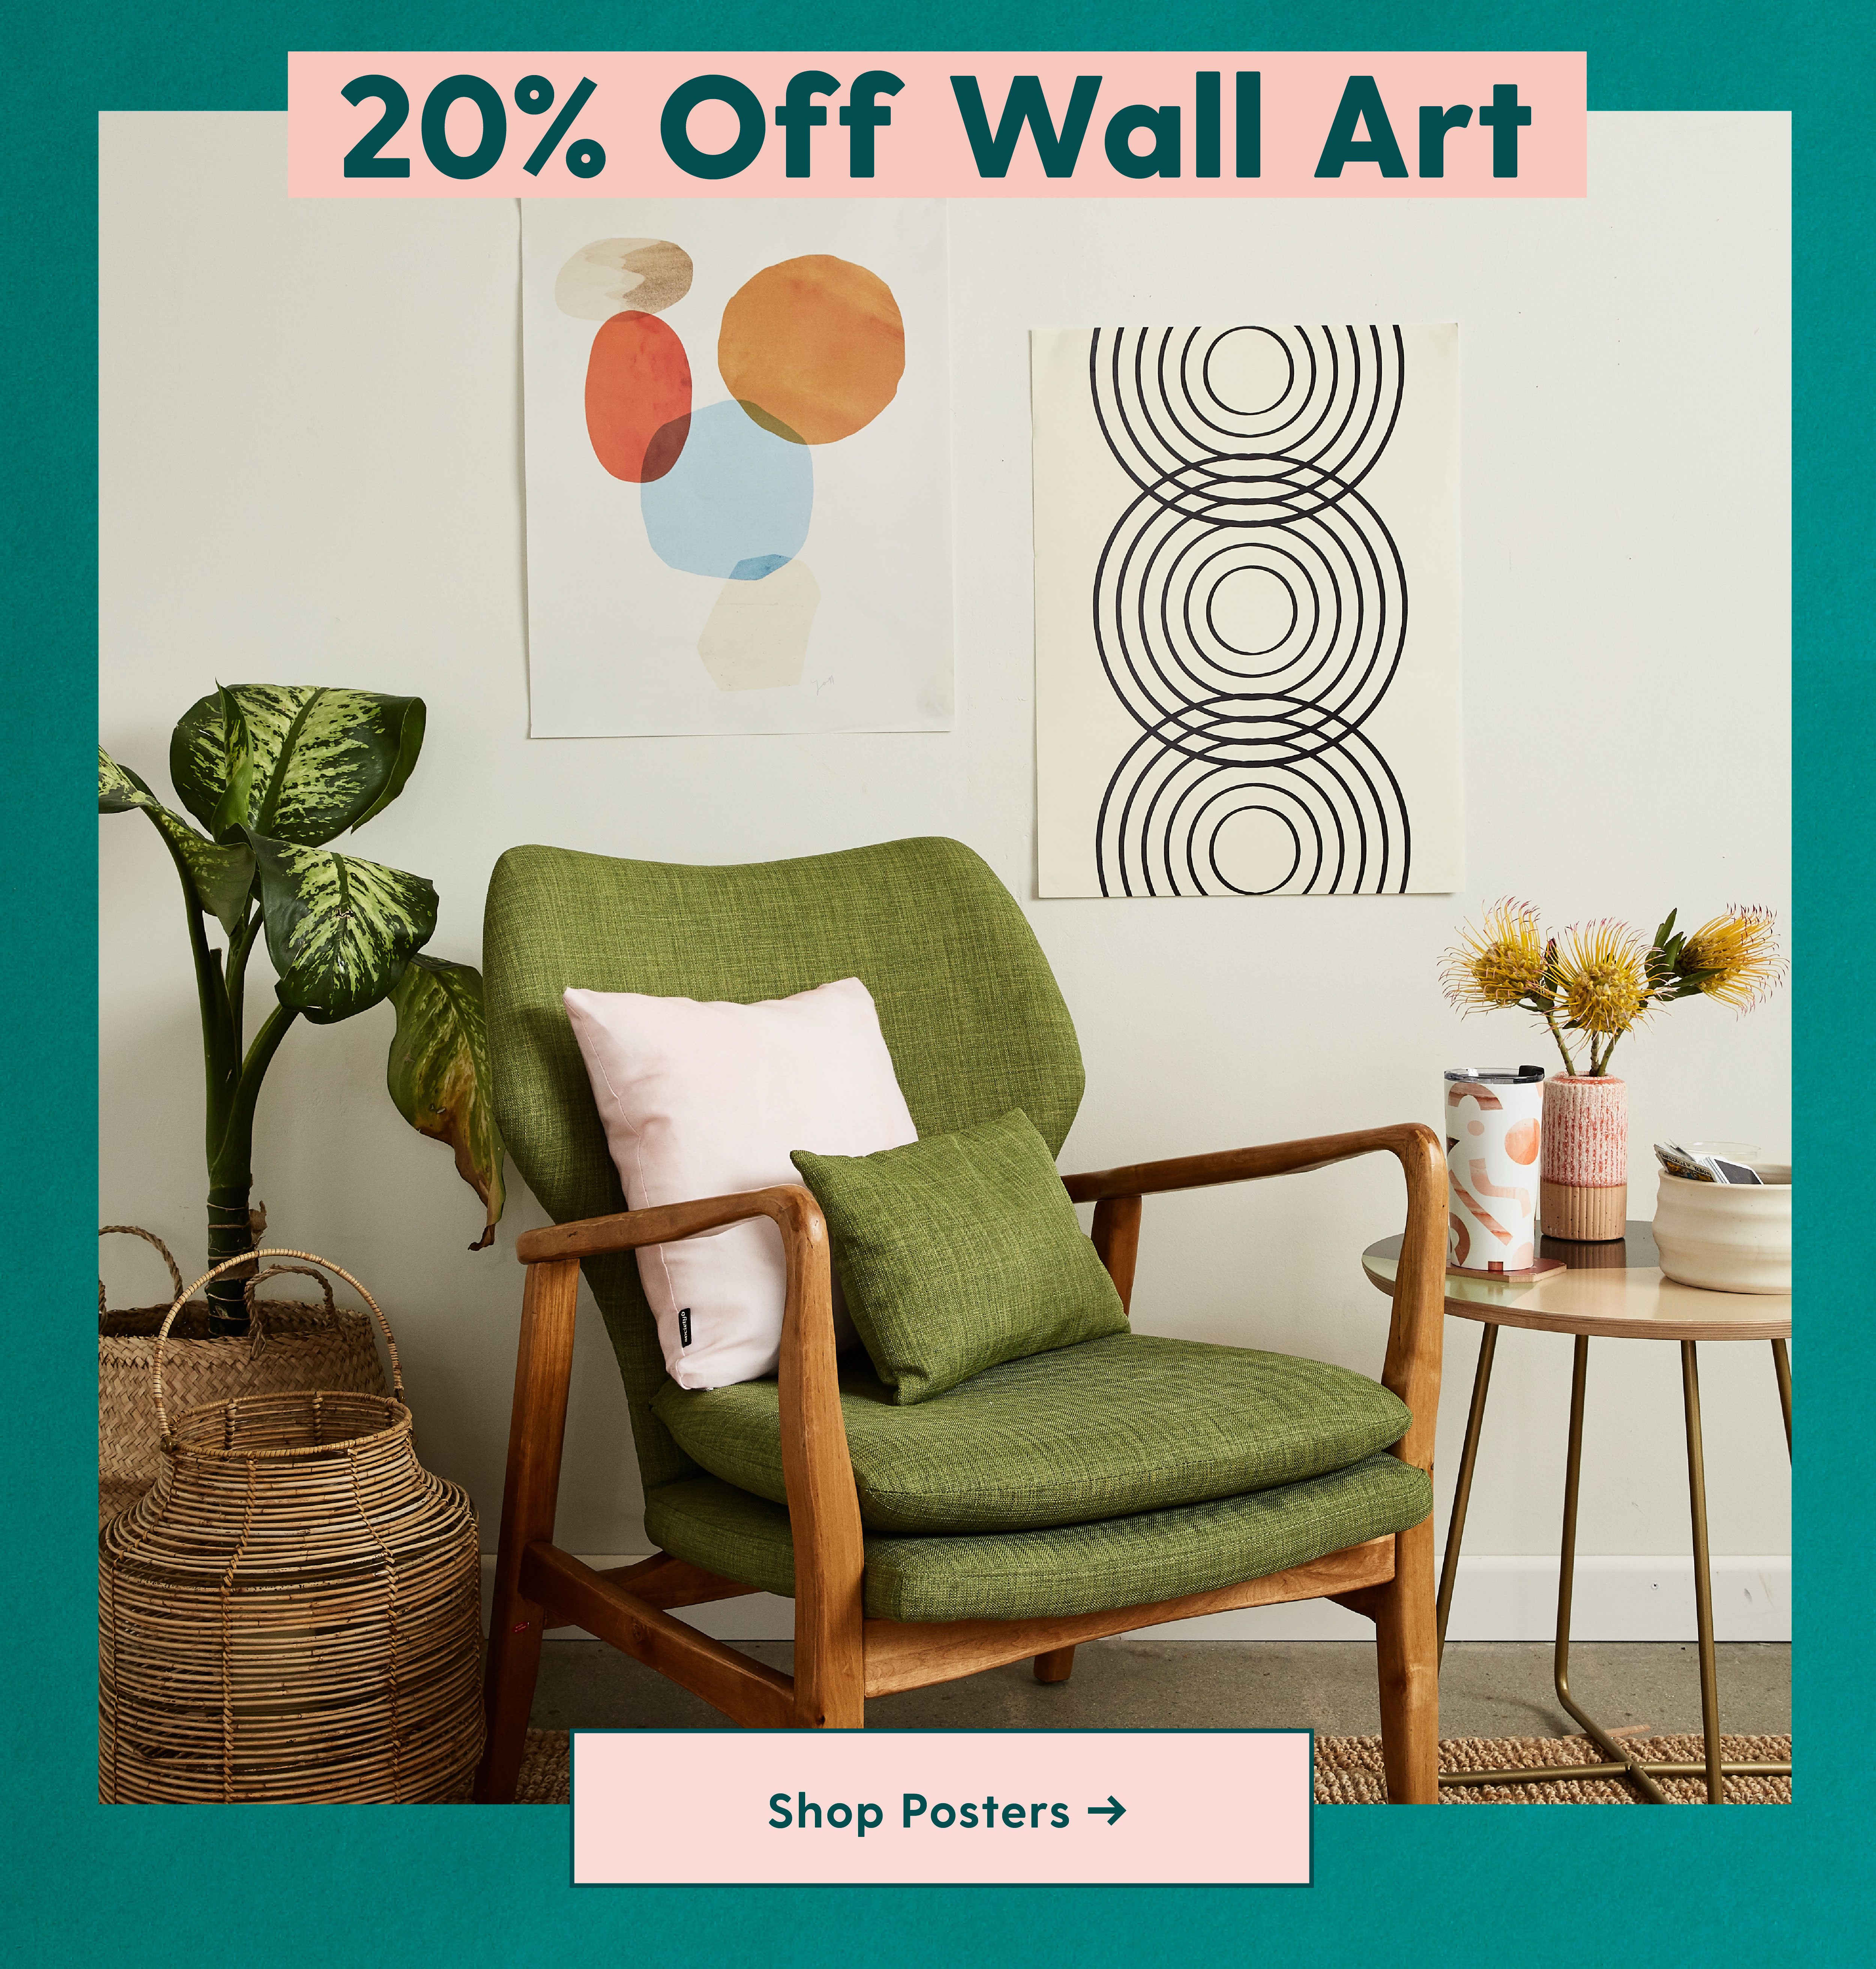 20% Off Wall Art Shop Posters